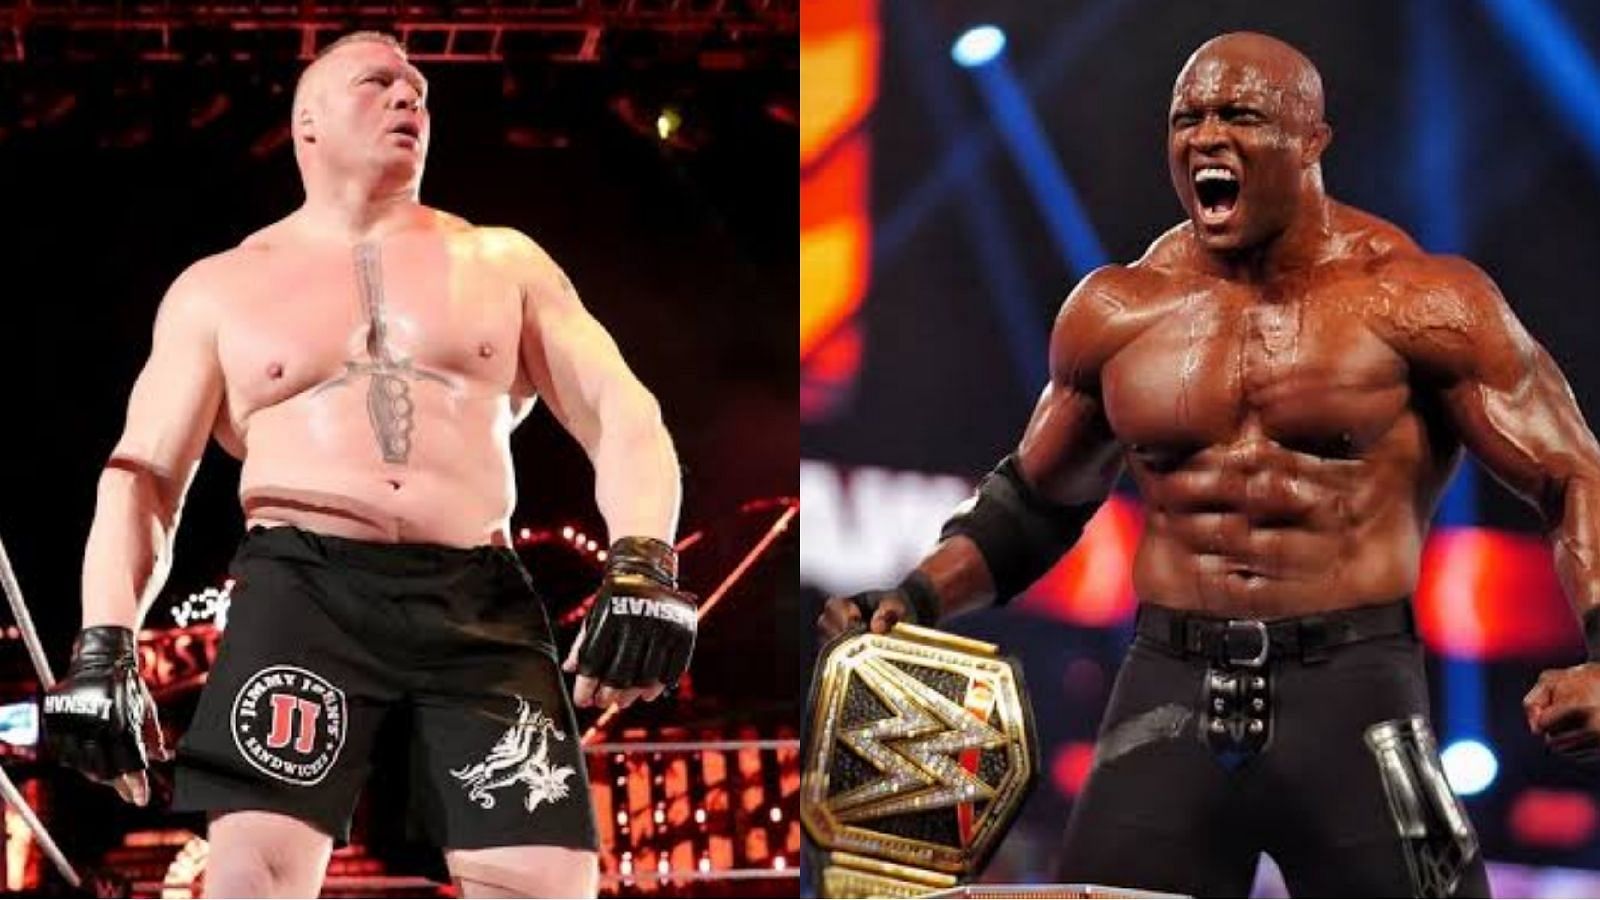 Brock Lesnar and Bobby Lashley competed at the 2022 Royal Rumble.